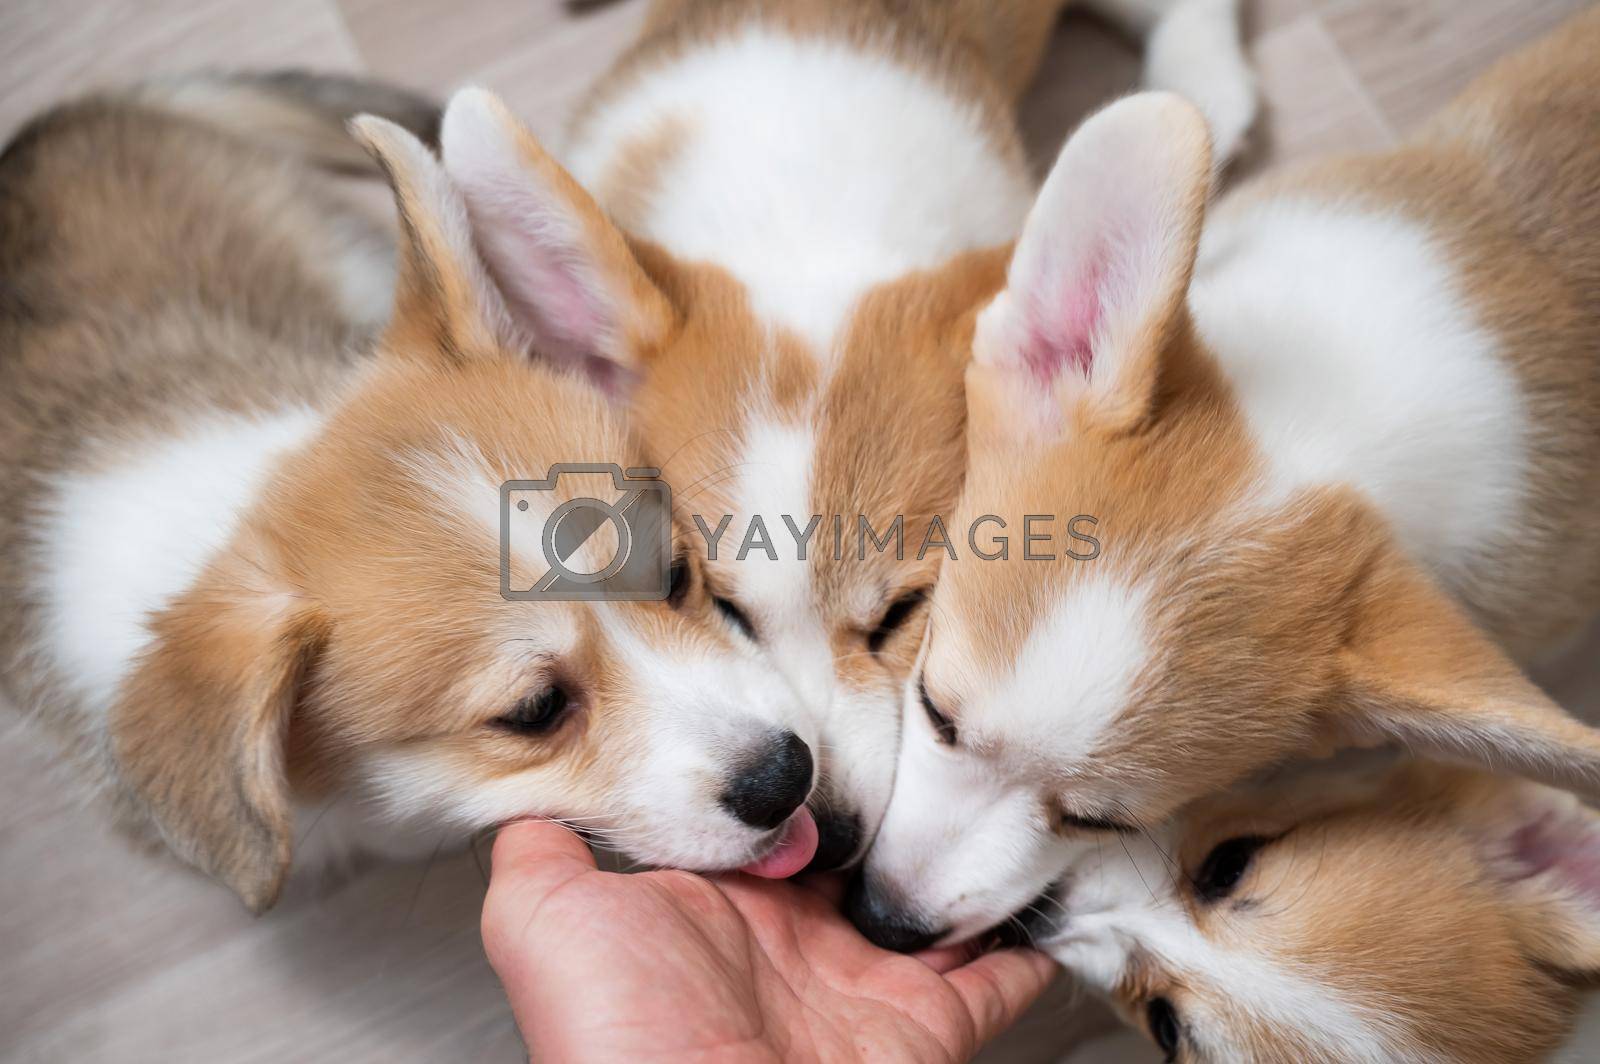 Royalty free image of Funny welsh corgi dogs reach for a man's hand. by mrwed54